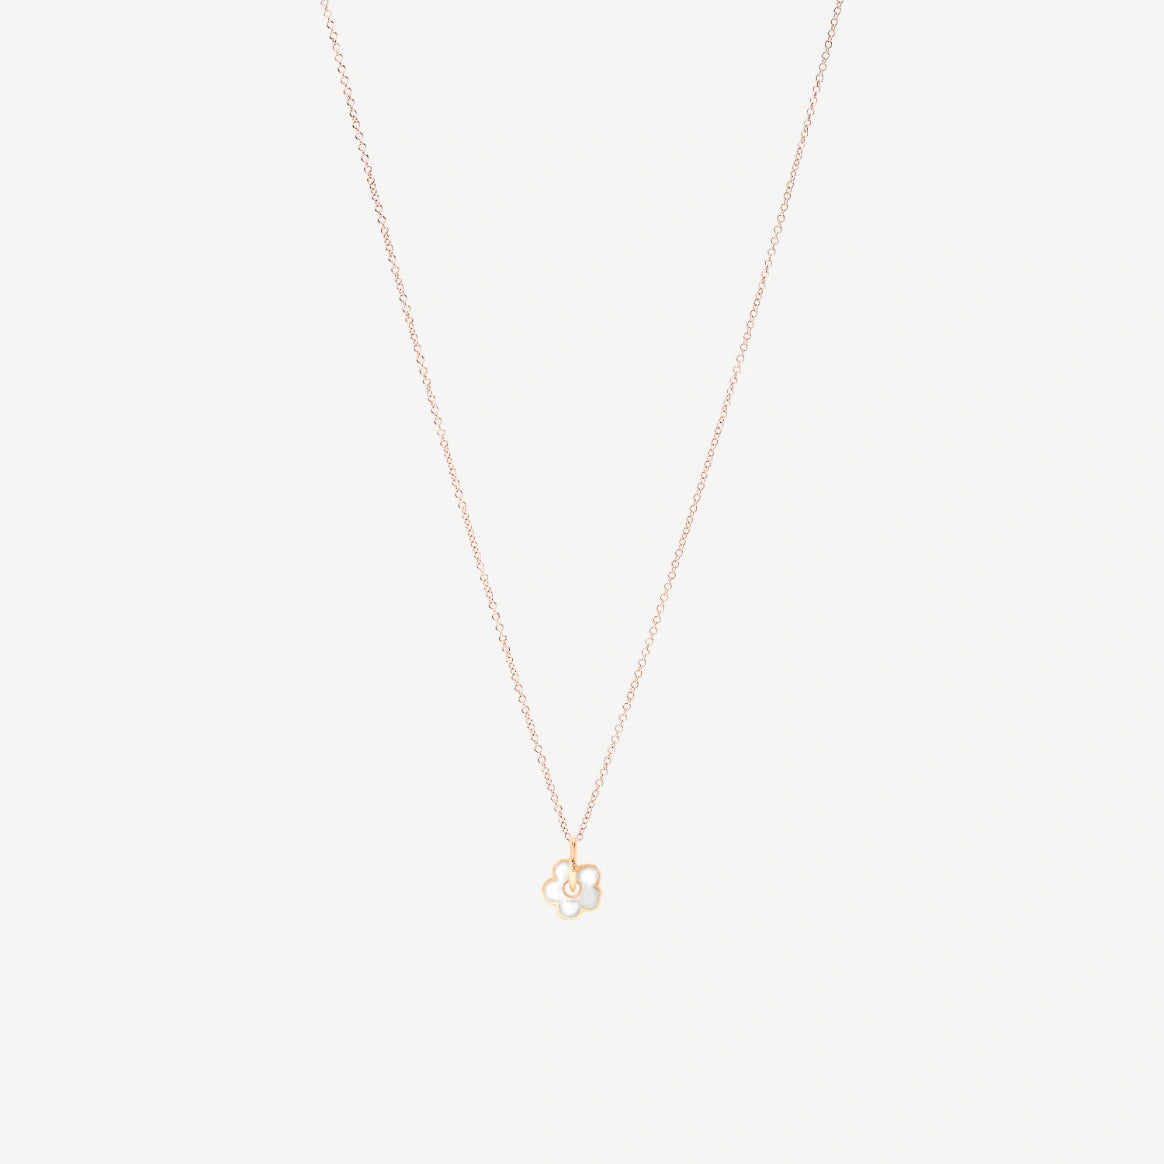 Dodo Flower Charm in 9k Rose Gold with Mother of Pearl effect - Orsini Jewellers